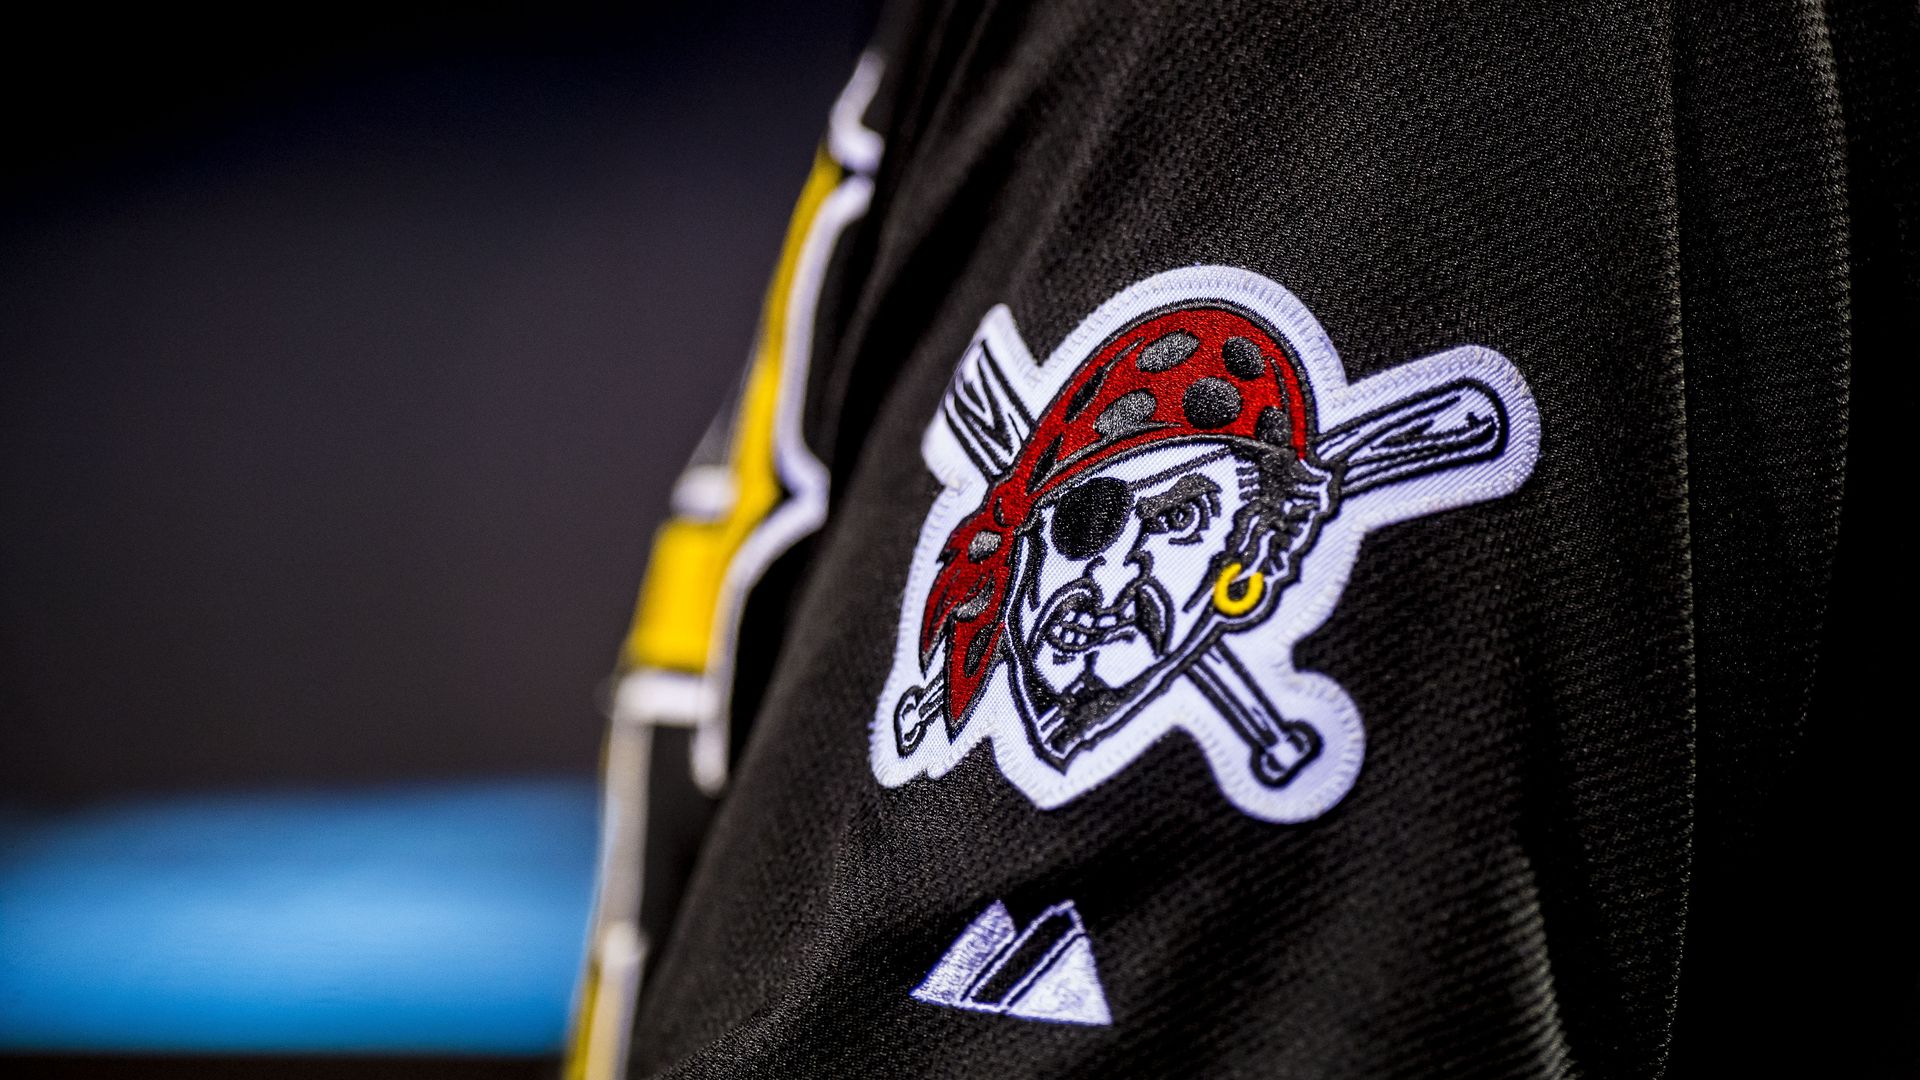 The Pirates logo eyes the field during a Major League Baseball game.